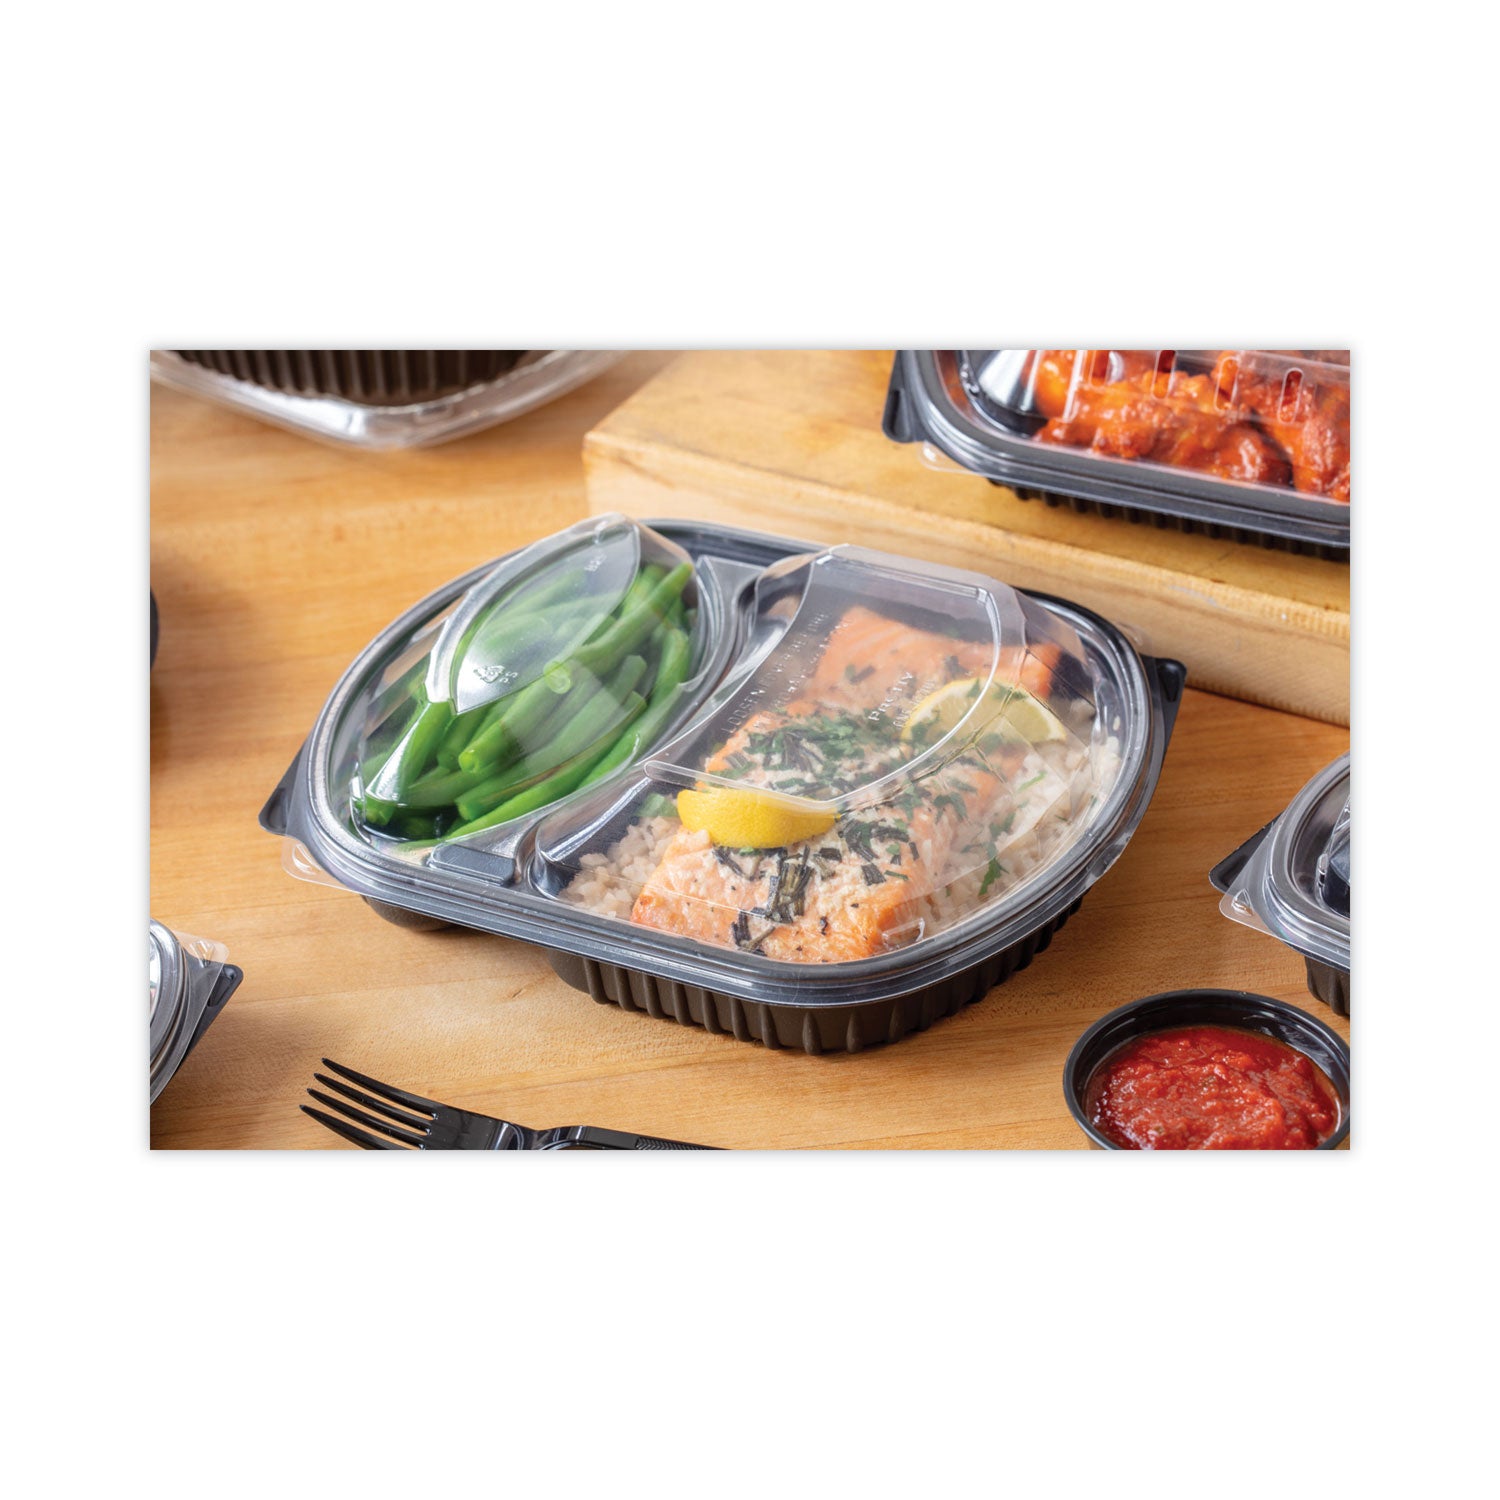 clearview-mealmaster-lid-with-fog-gard-coating-large-2-compartment-dome-lid-938-x-8-x-125-clear-plastic-252-carton_pctycn8467h00d0 - 5